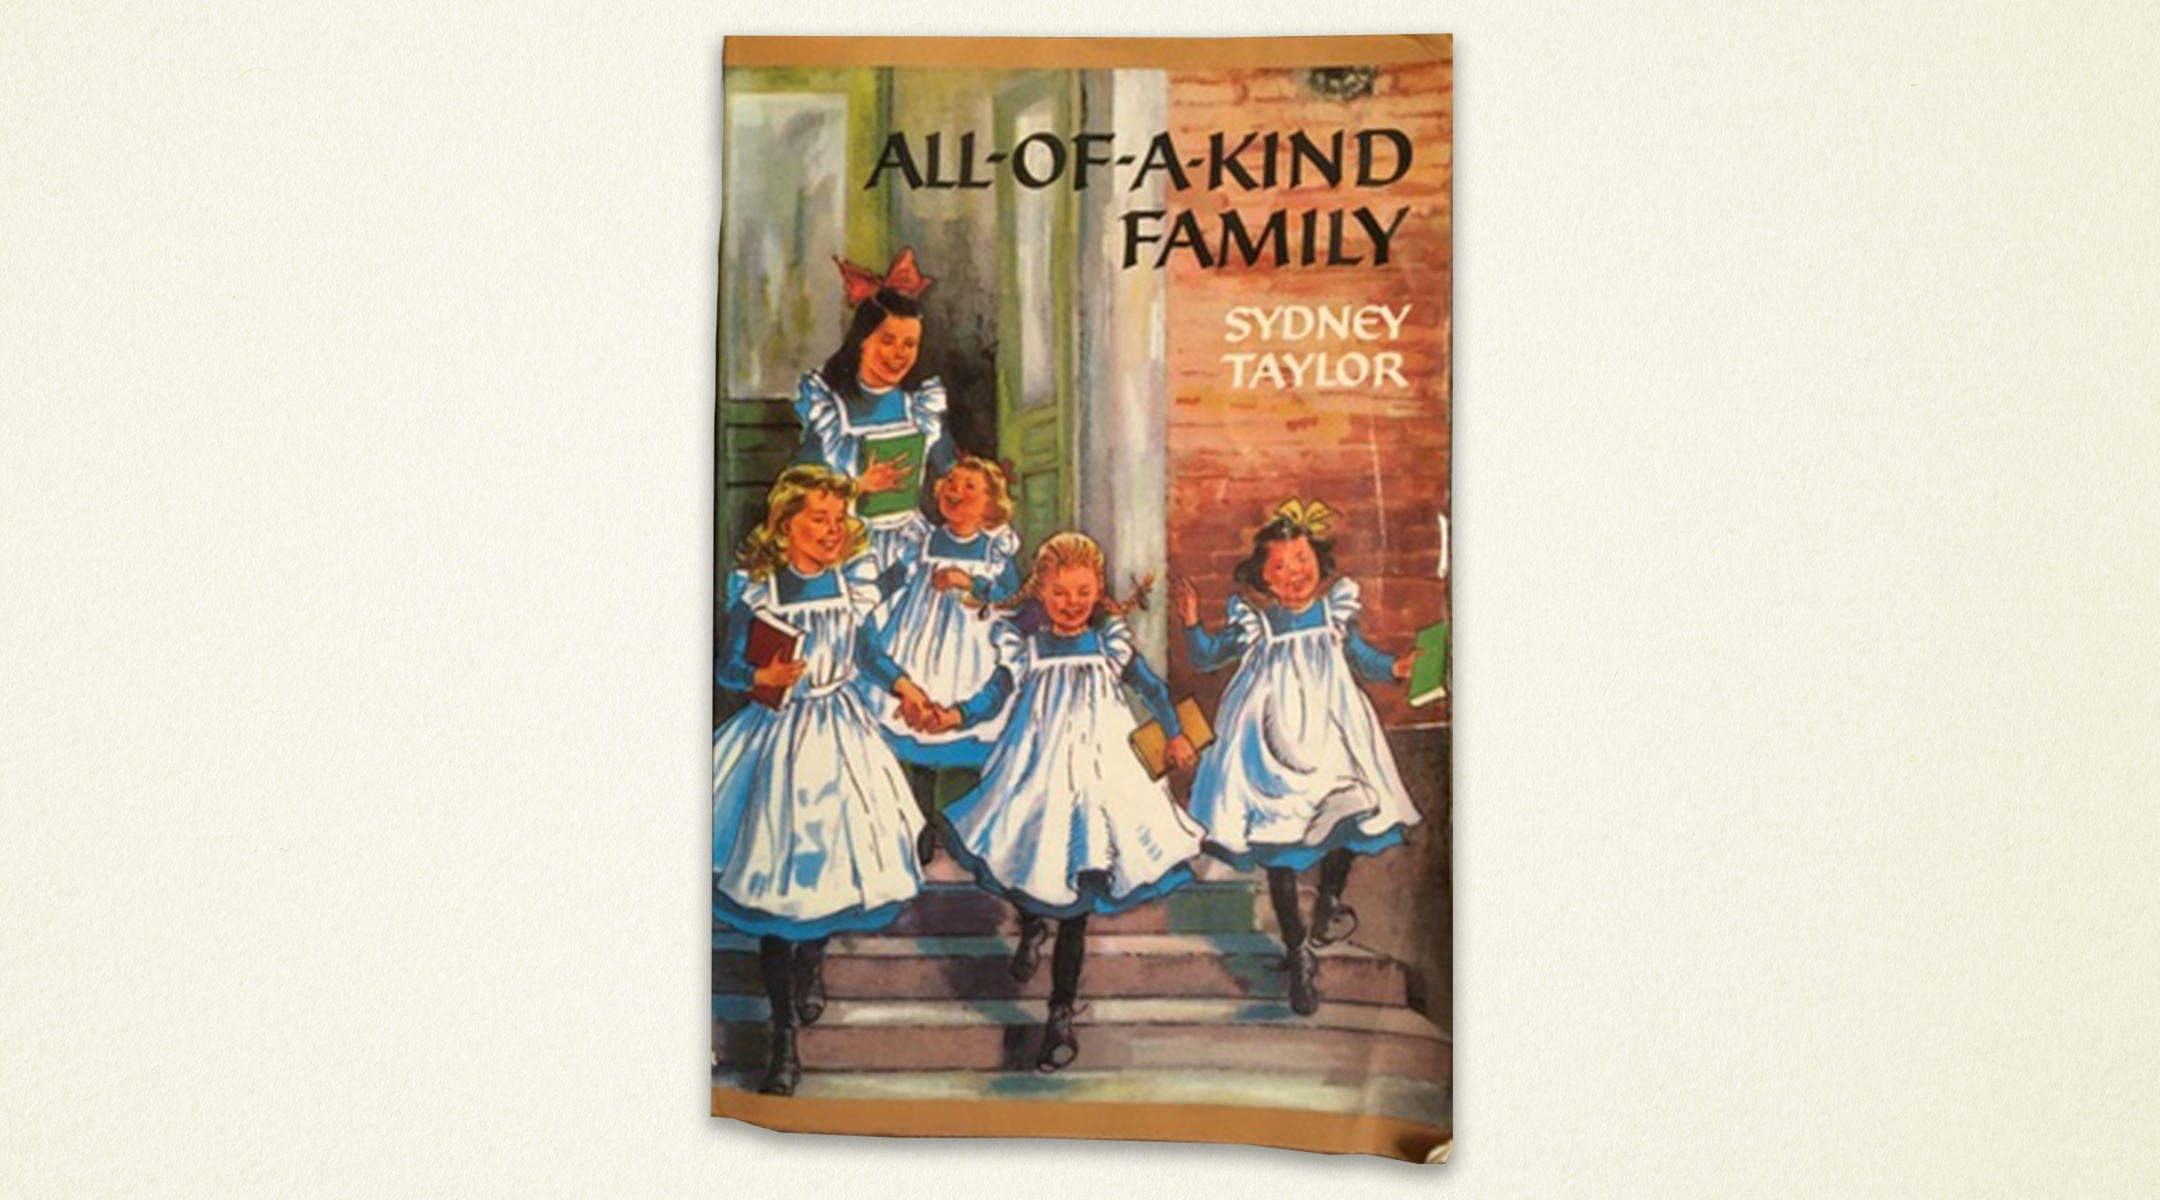 The ‘All-of-a-Kind Family’ books are set to become a TV show